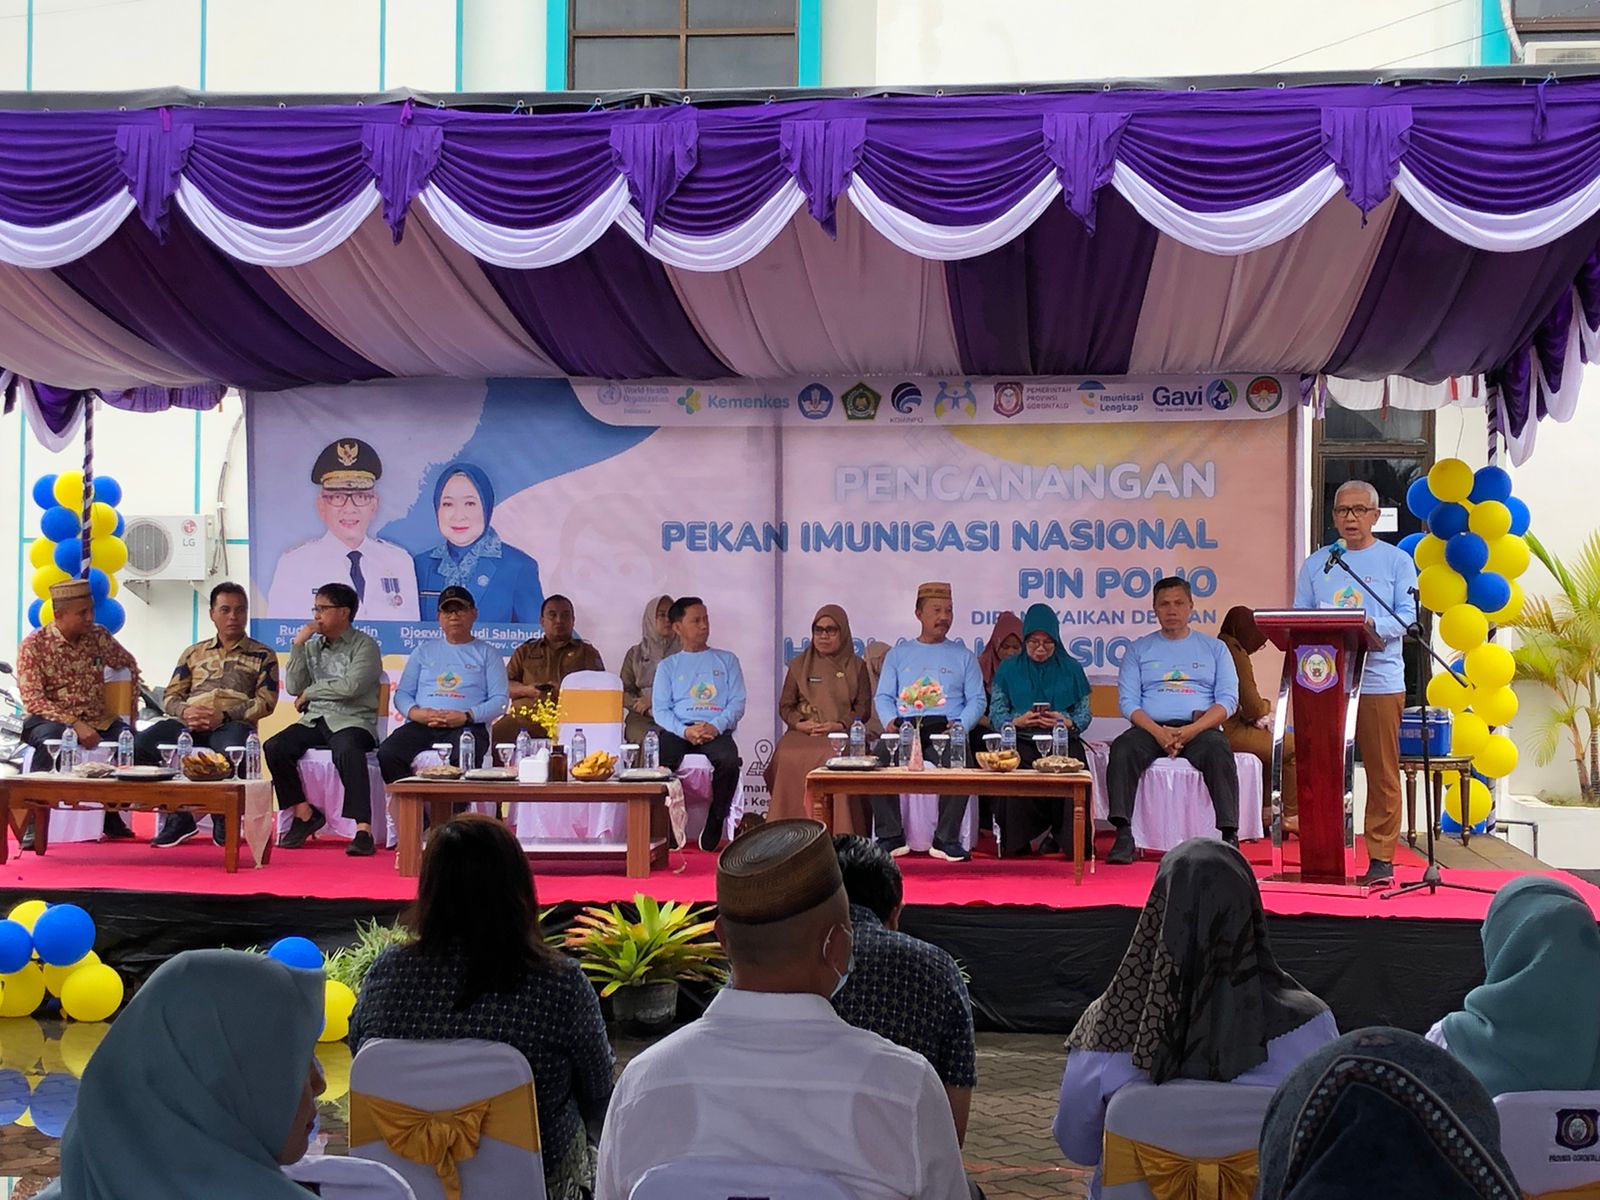  Acting Governor Rudi Invites Gorontaloans to Parcipate in Making the 2024 National Immunization Week (PIN) a success.